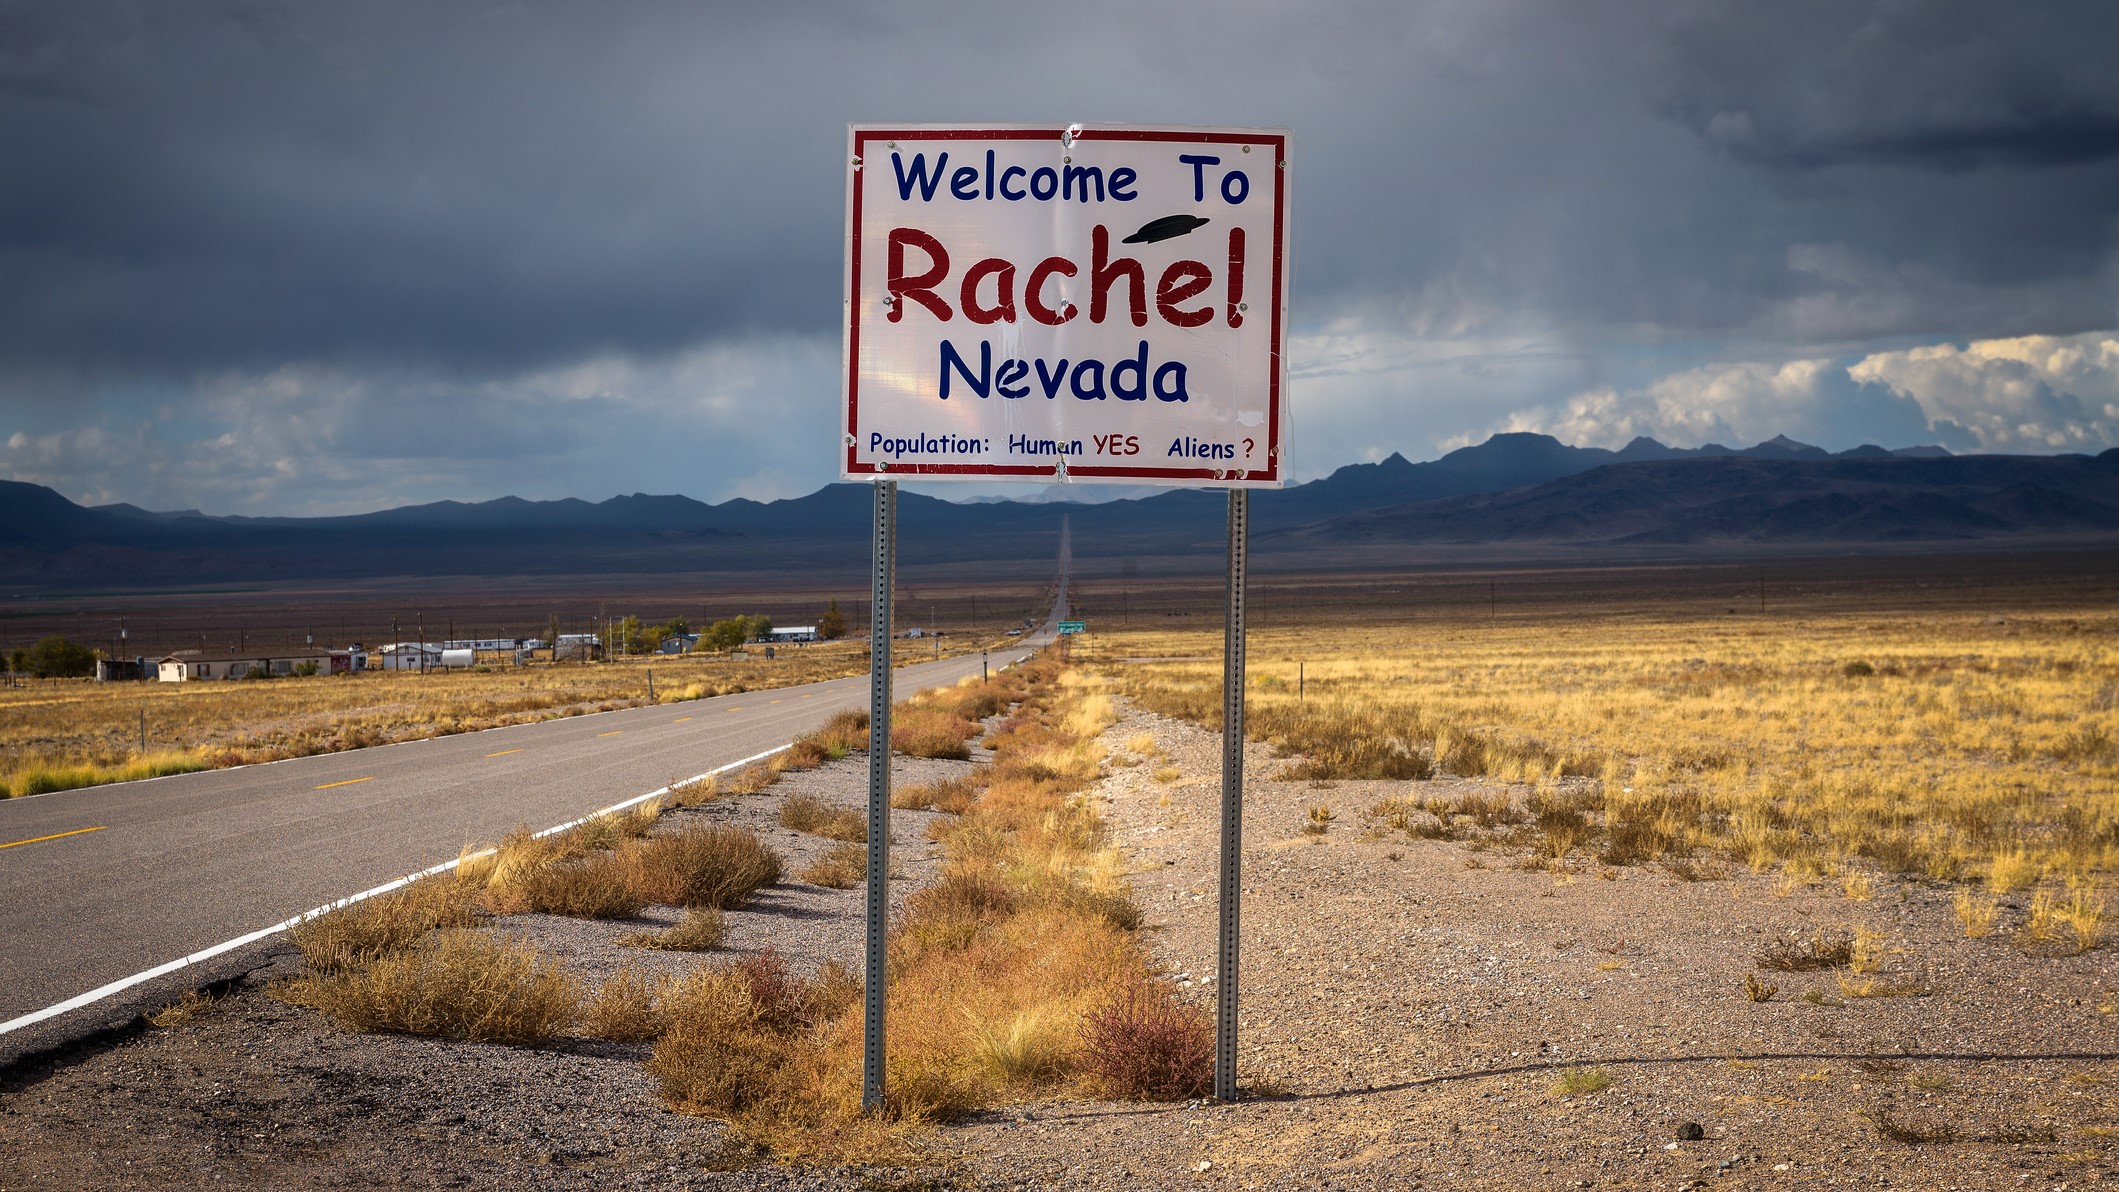 District 51 is located 120 miles (200 kilometers) northwest of Las Vegas, near the small towns of Rachel and Hiko.